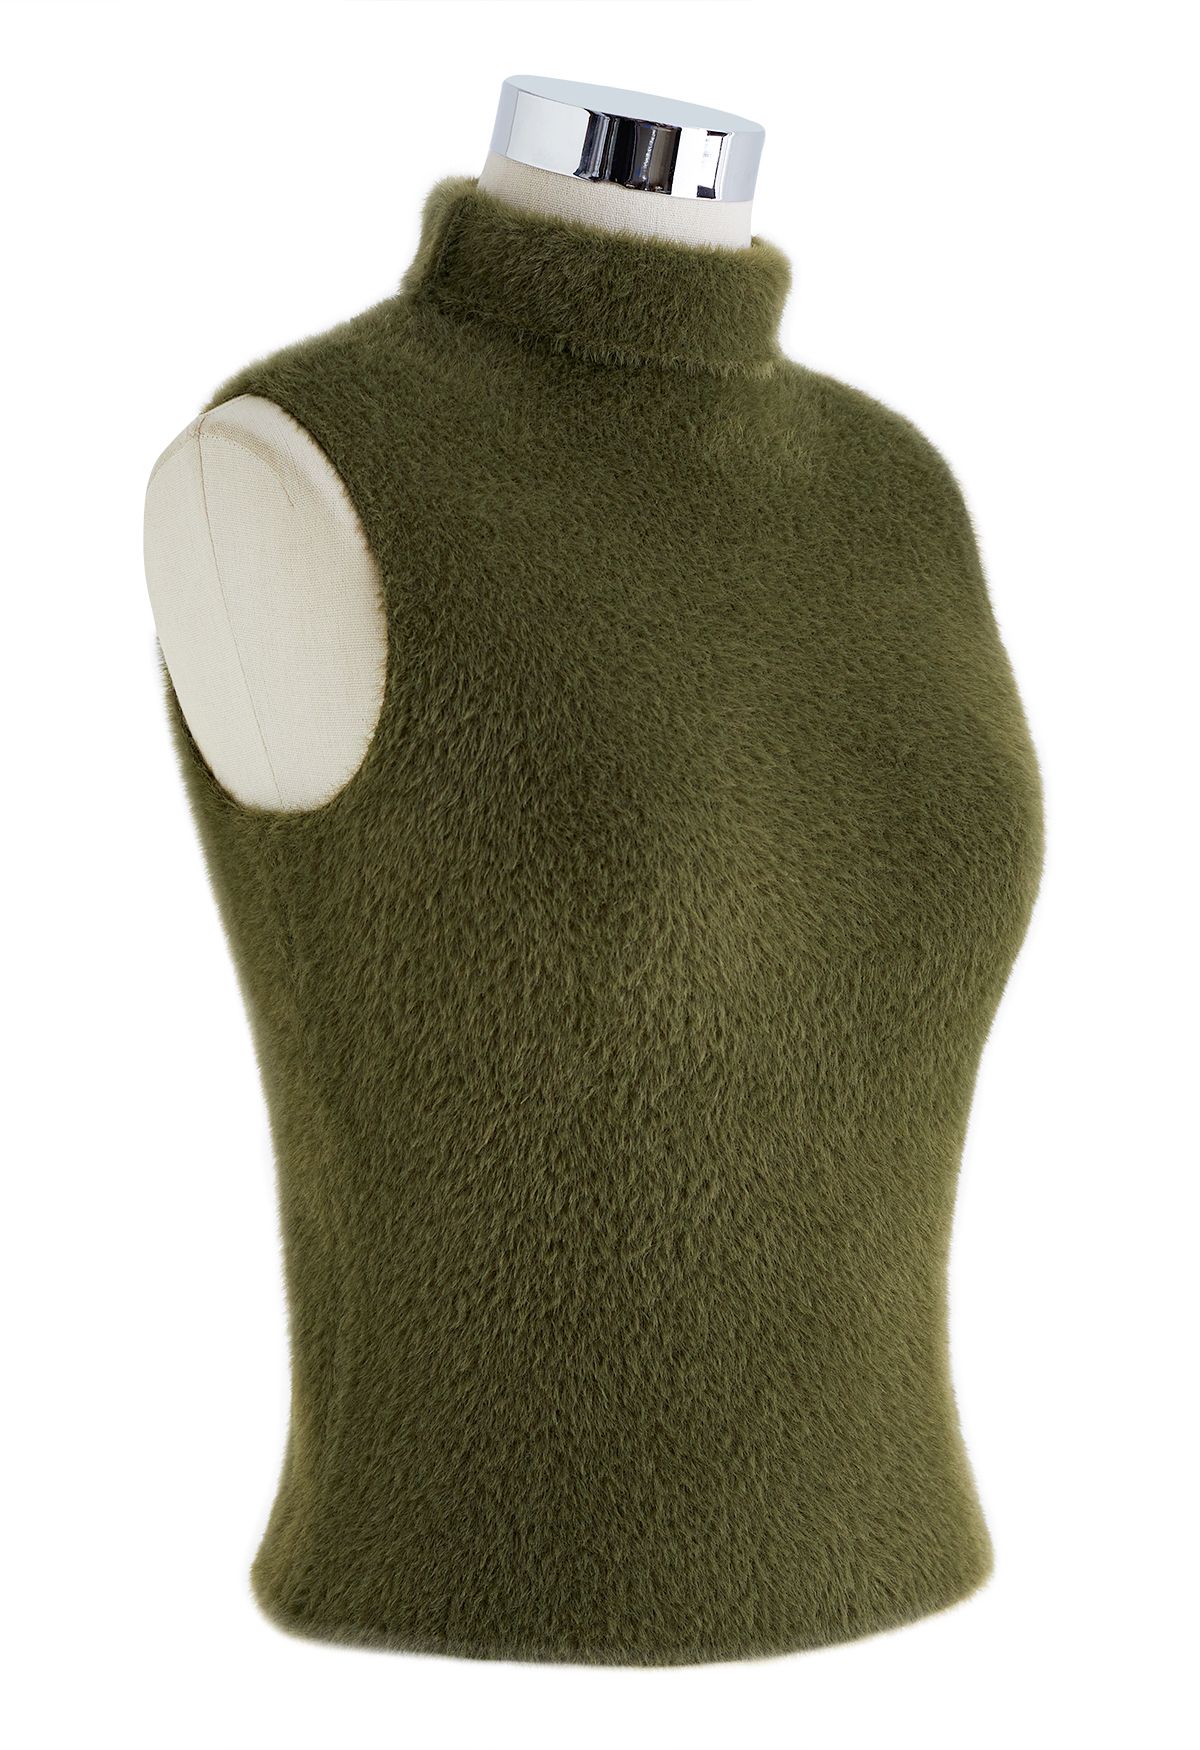 High Neck Fuzzy Knit Tank Top in Moss Green